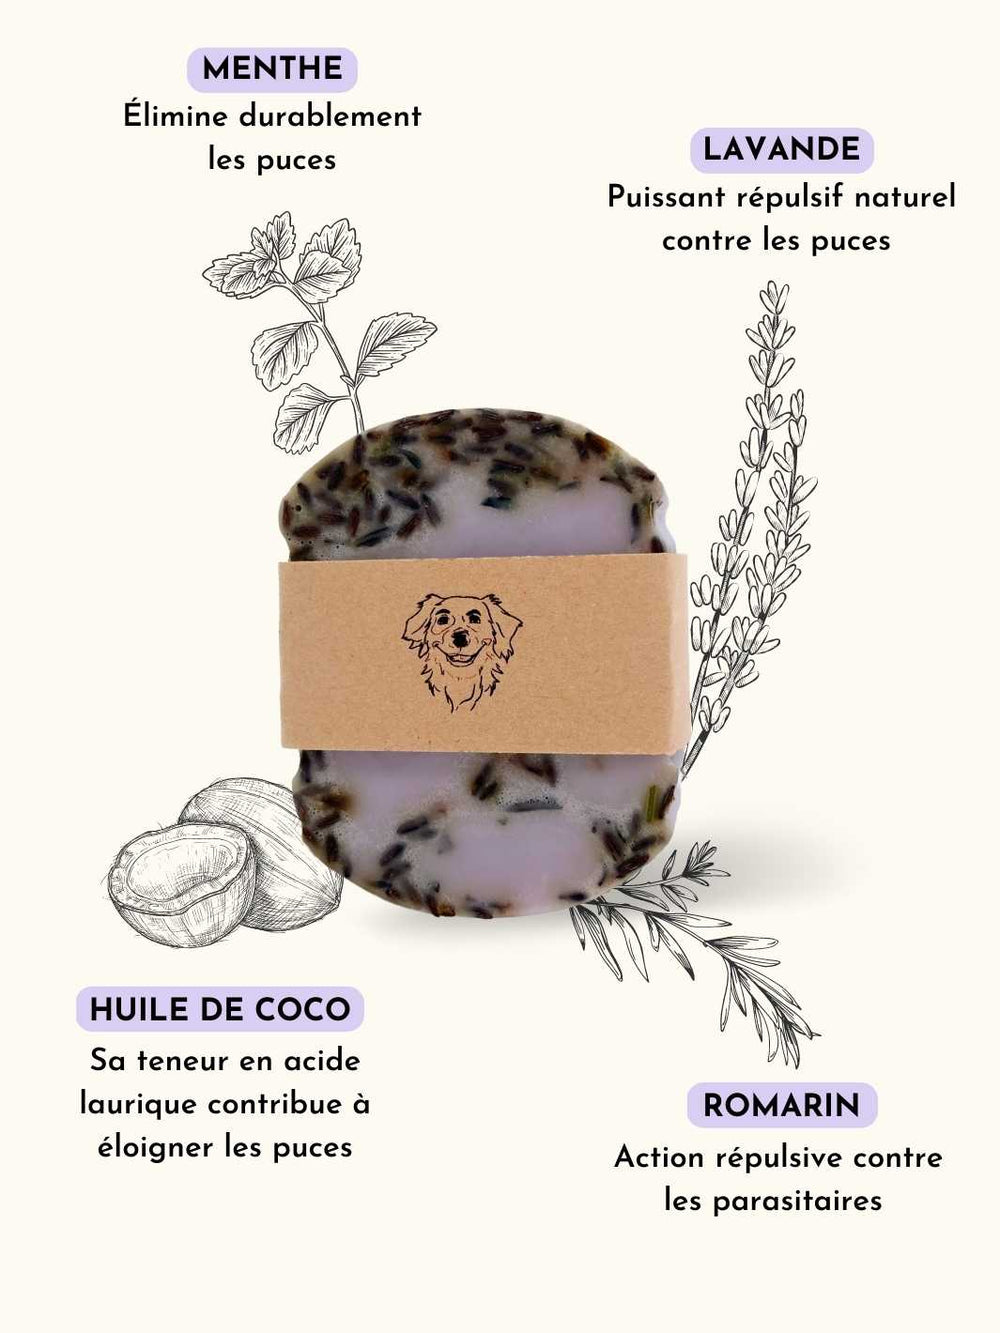 Vermifuge naturel - Chien et chat - Made in France – Truffe delice